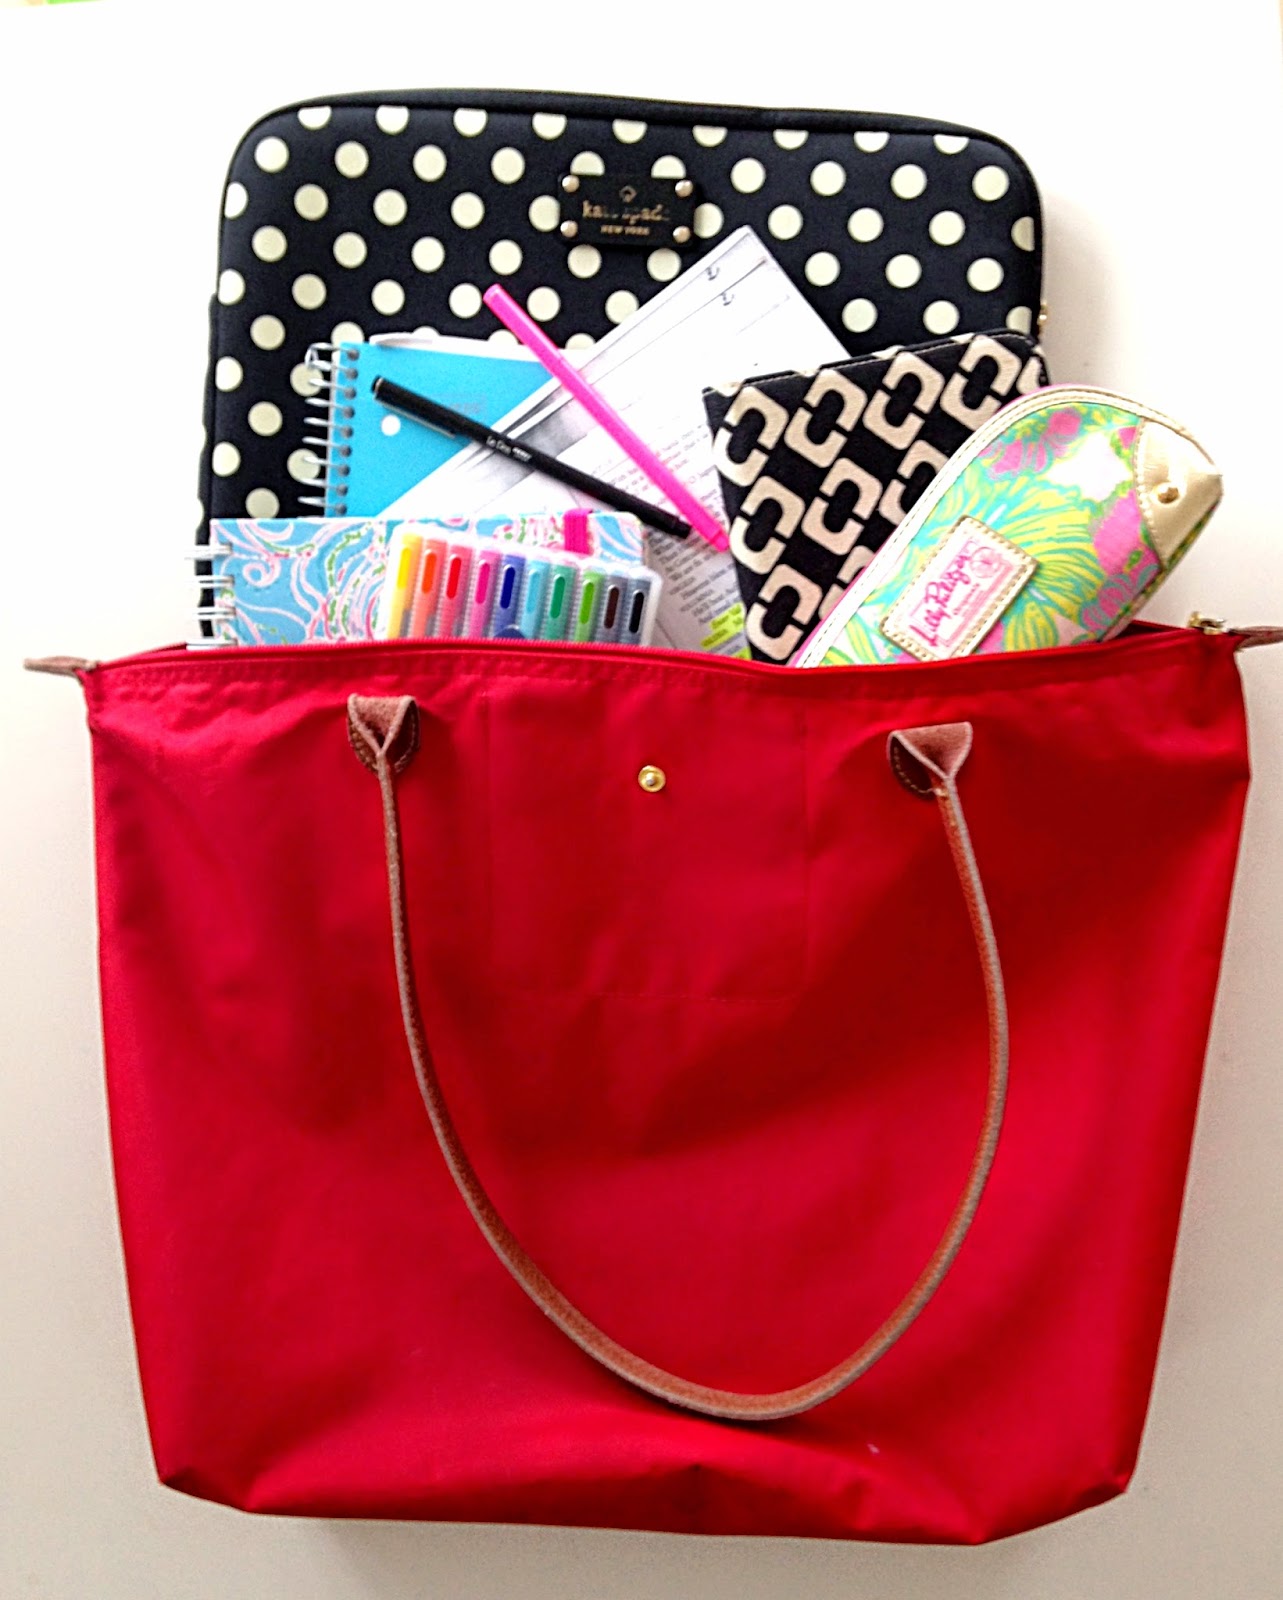 Handbags & Heartbeats: What's In My School Bag? I Don't Got A Pencil Or Pen In This Bookbag